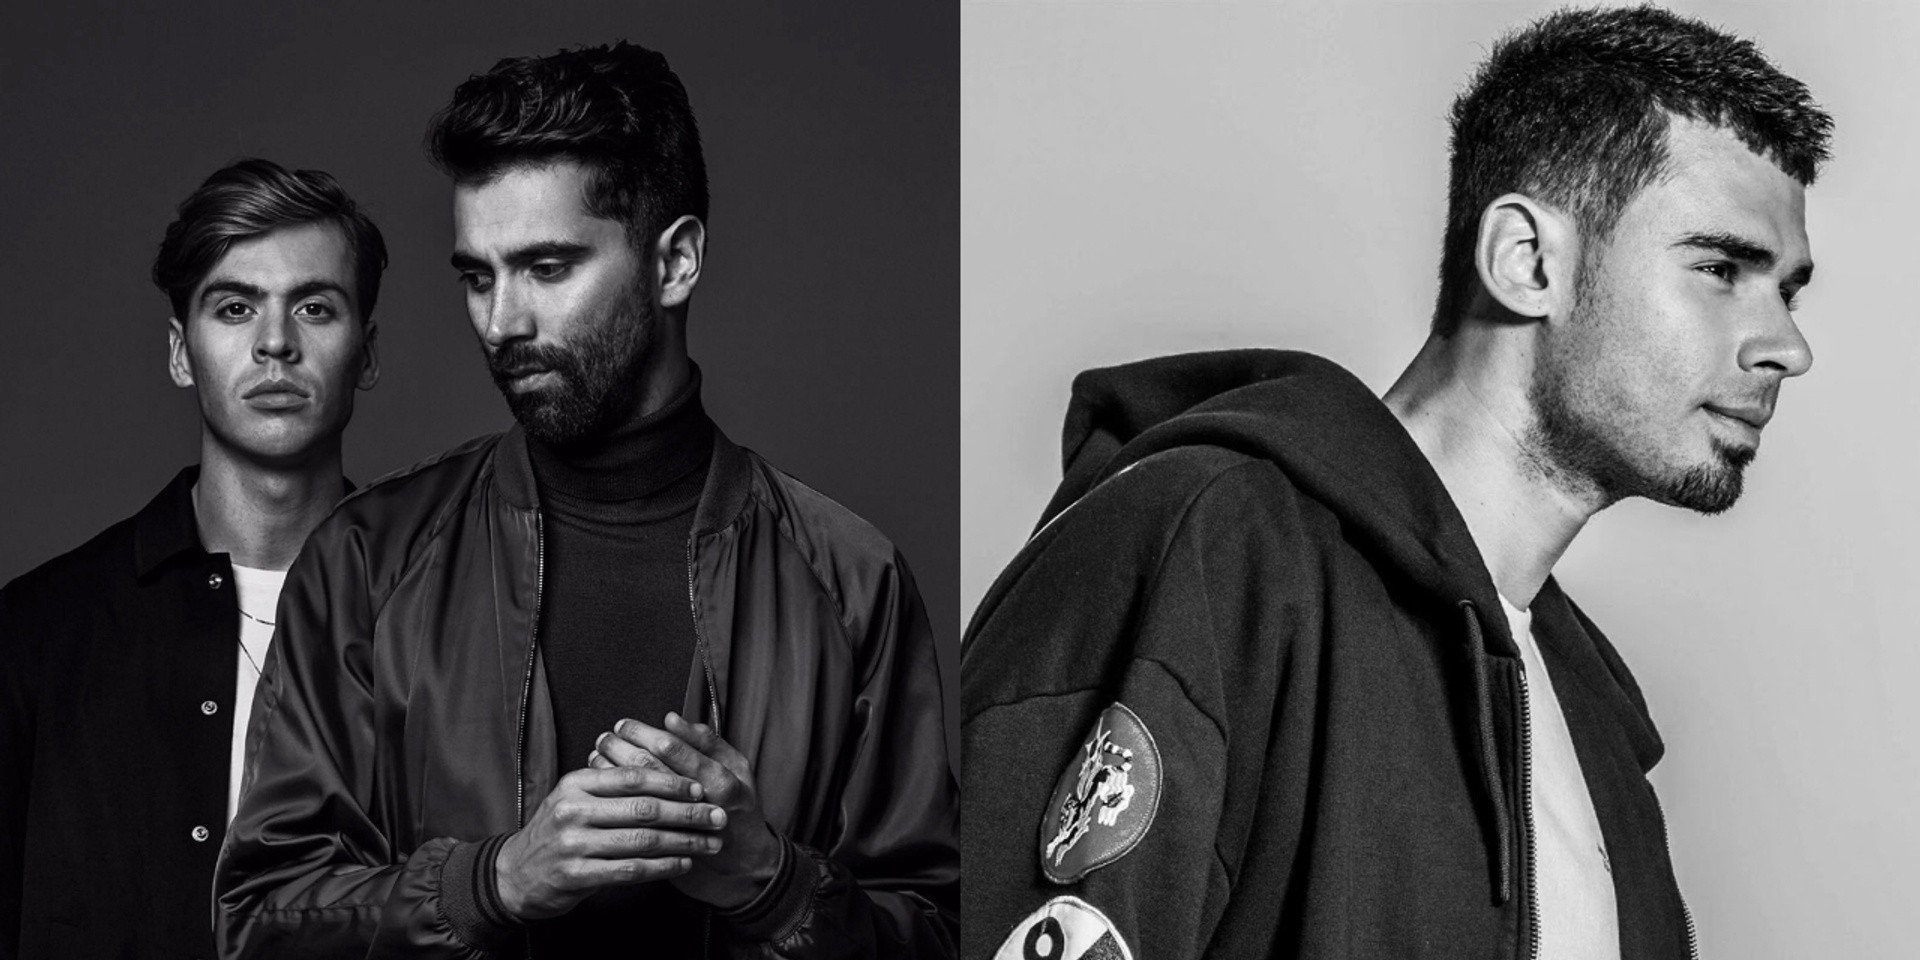 Siam Songkran Music Festival announces line-up for debut event – Yellow Claw, Afrojack and more 